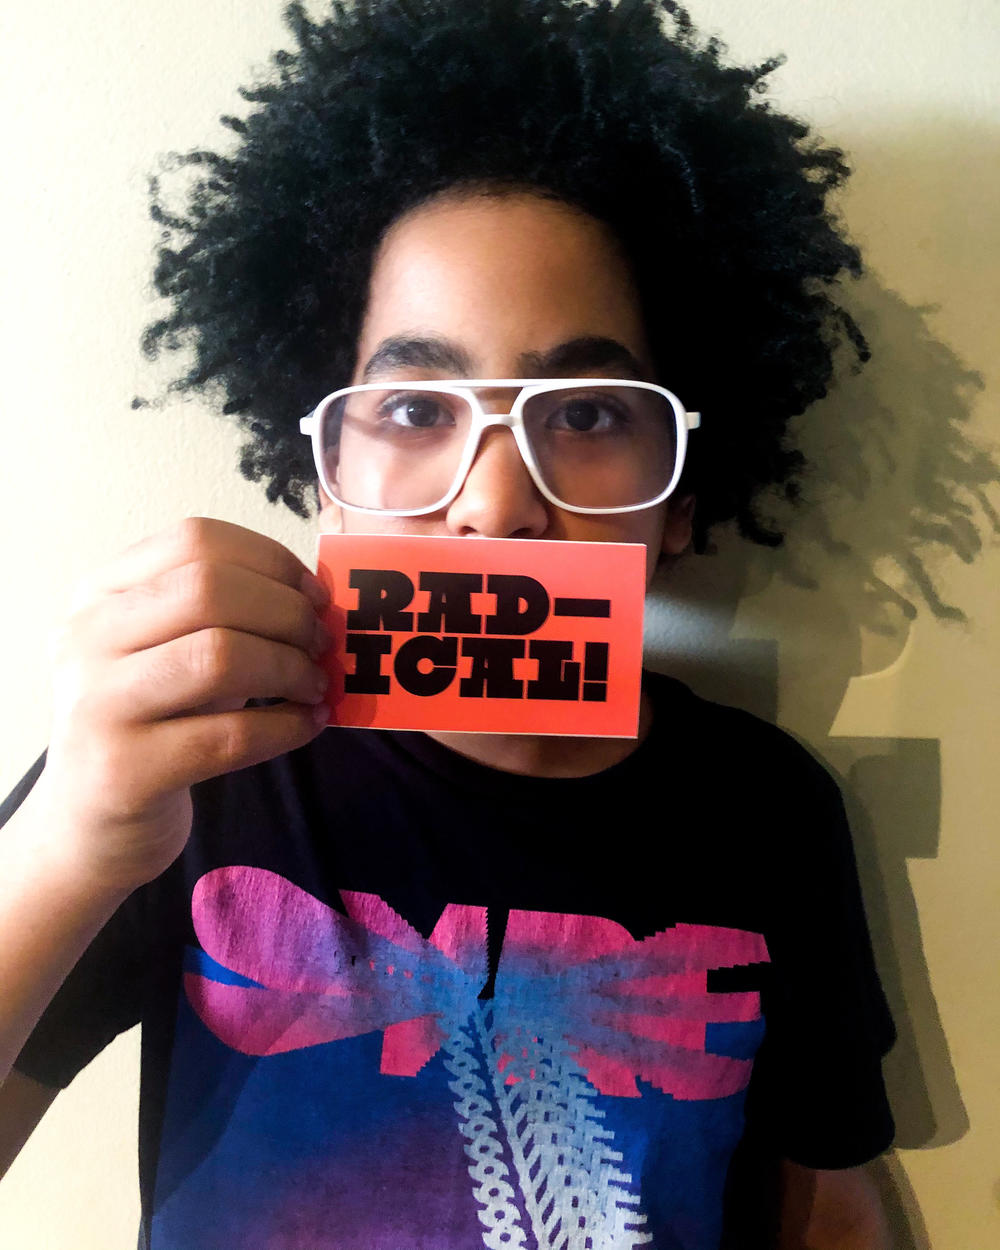 Elijah Gomez holds up one of his sticker designs that says "RADICAL!"